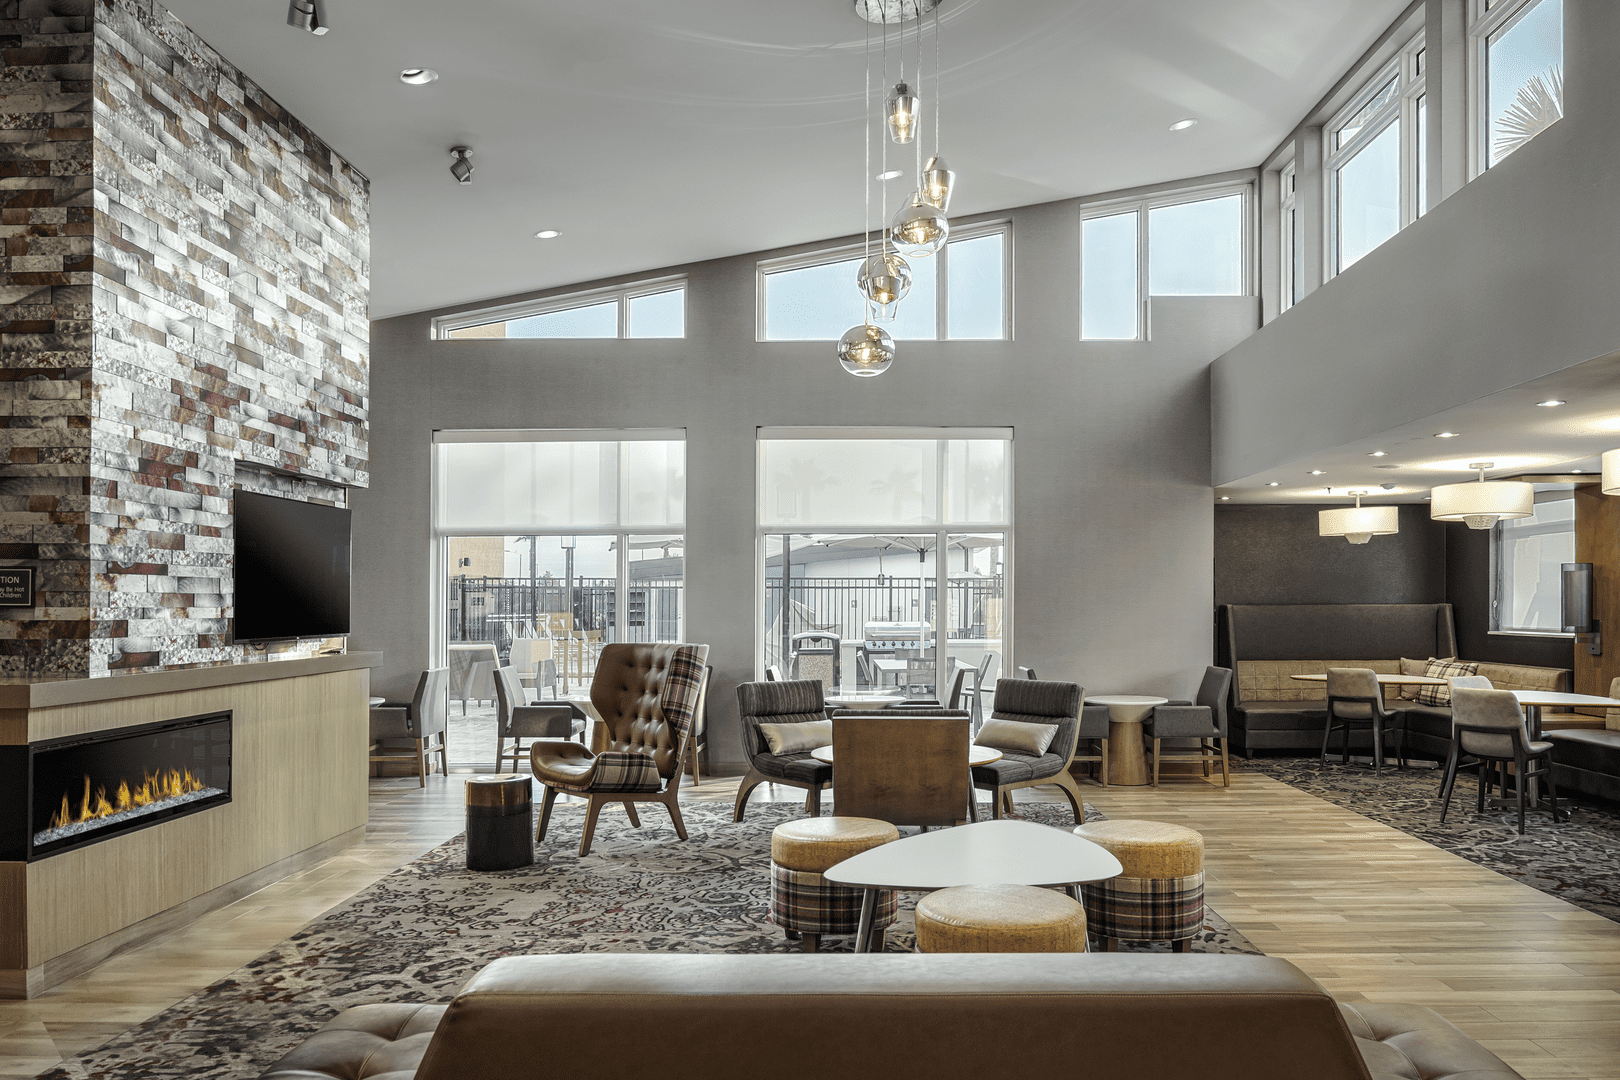 Hotel lobby with brown chairs/couches and brick fireplace and gray walls